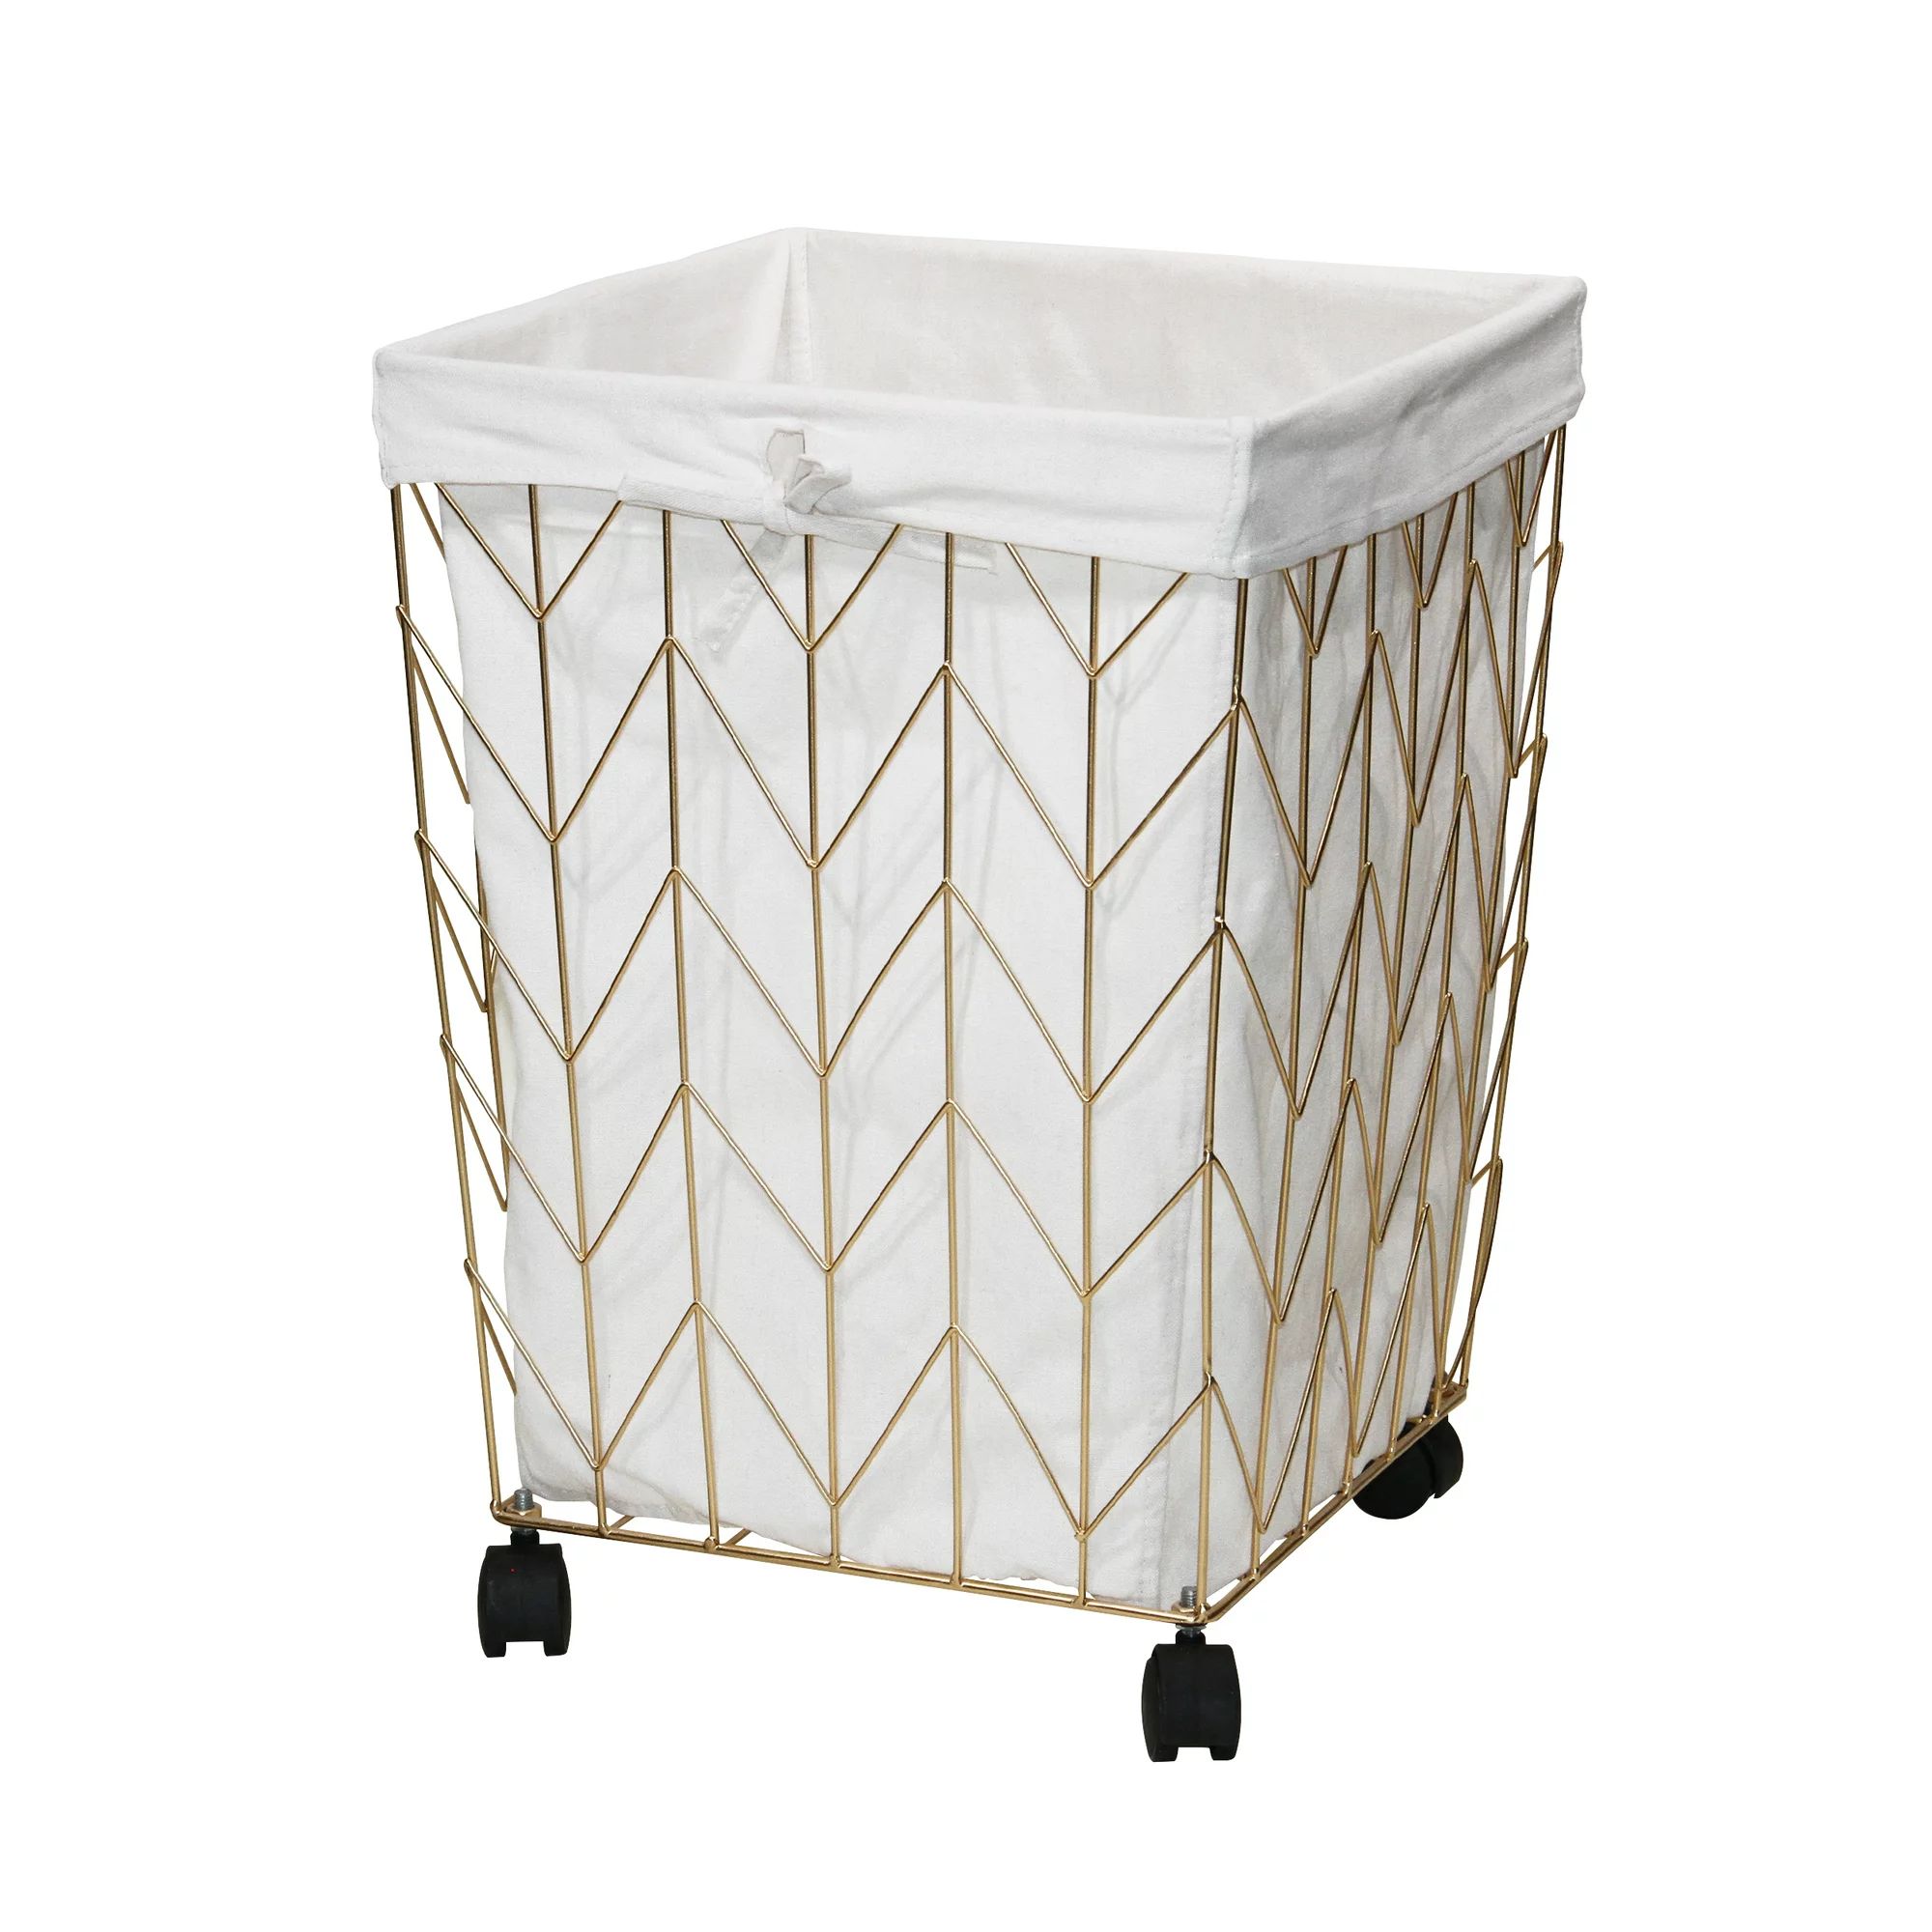 Mainstays Square Chevron Pattern Metal Hamper with Wheels, Gold and Natural | Walmart (US)